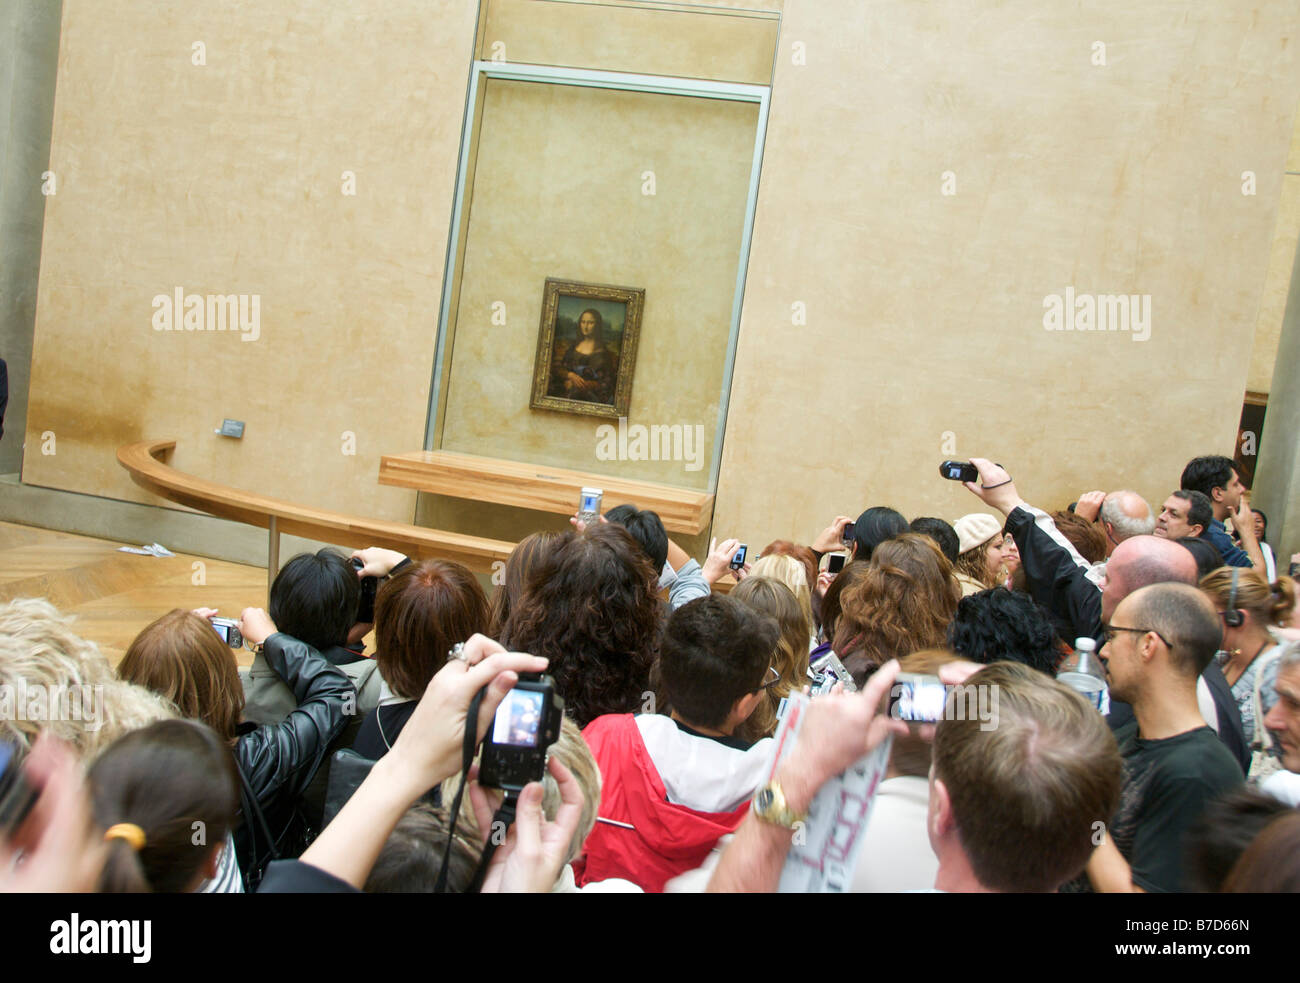 Crowd of tourists taking pictures of the Mona Lisa, Louvre, Paris, France, Europe Stock Photo